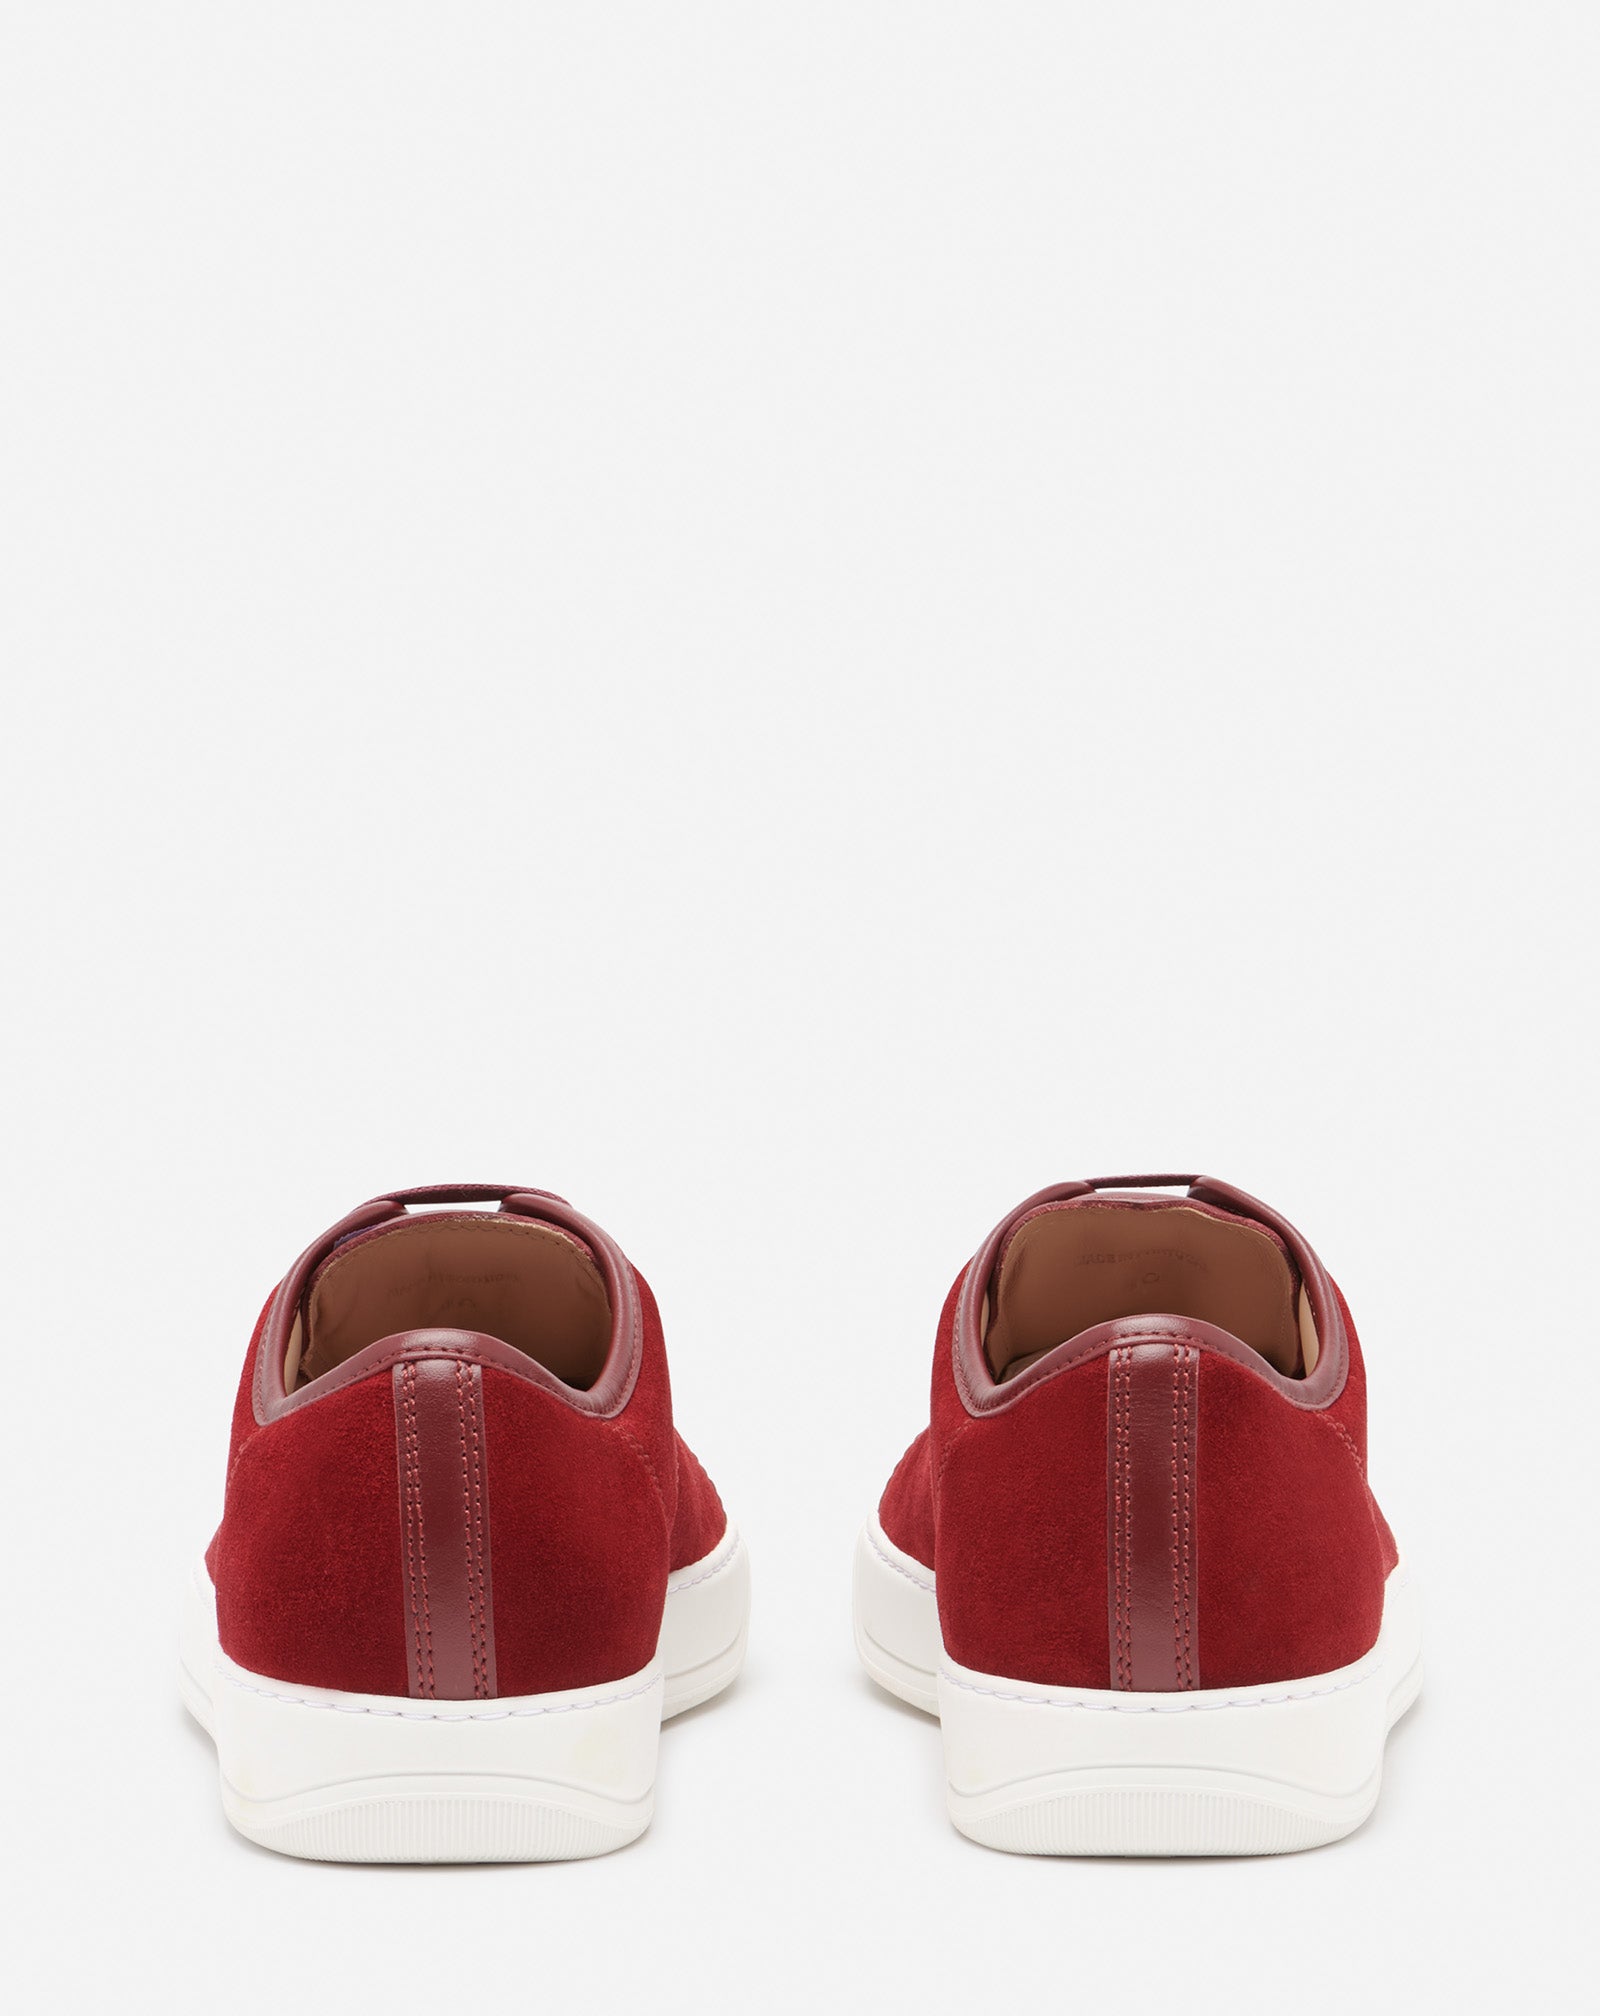 DBB1 LEATHER AND SUEDE SNEAKERS, BURGUNDY